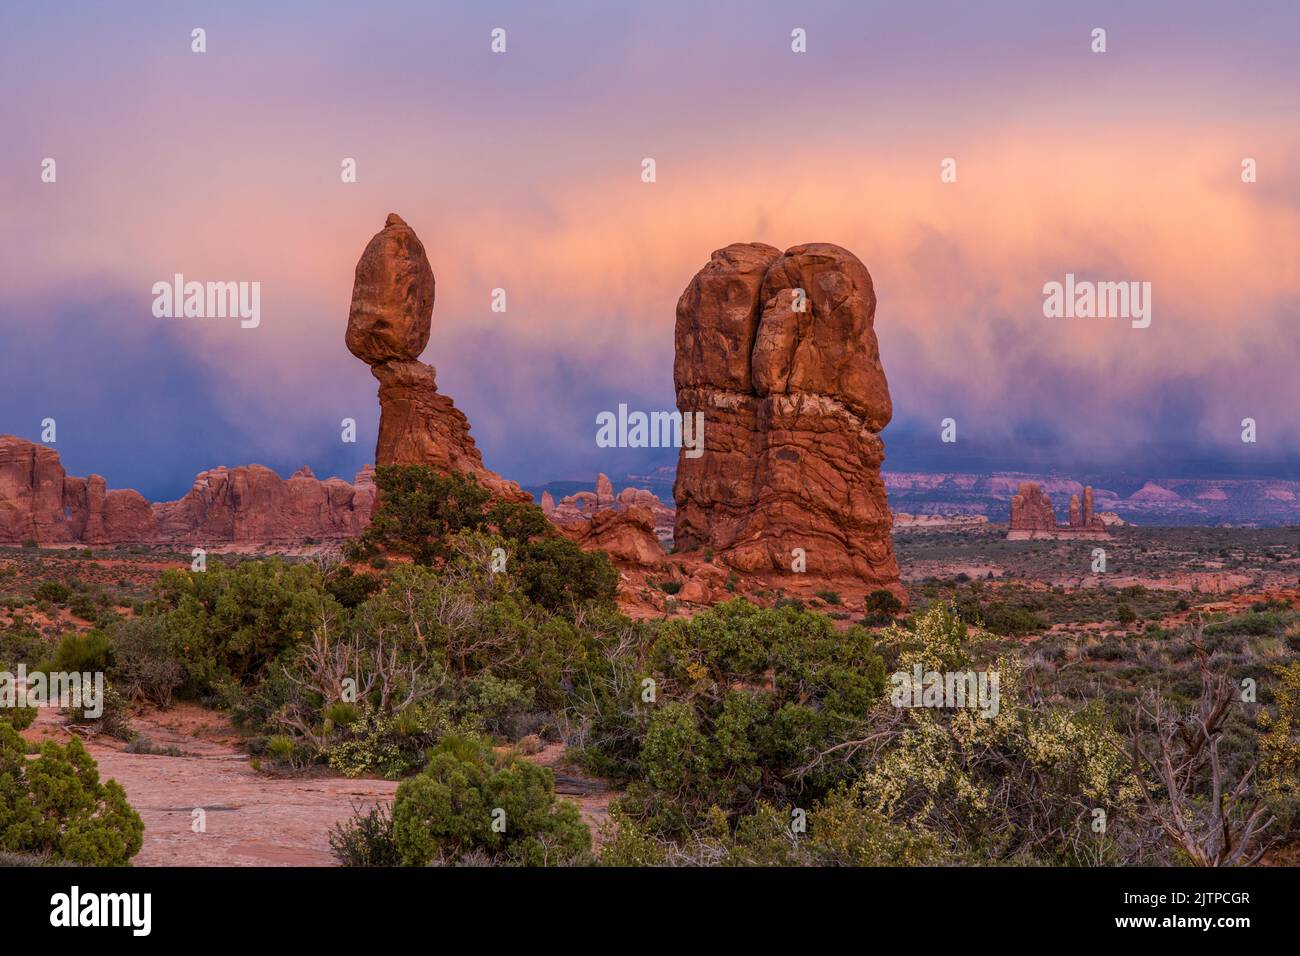 Colorful storm clouds in post-sunset light over Balanced Rock in Arches National Park, Moab, Utah. Stock Photo